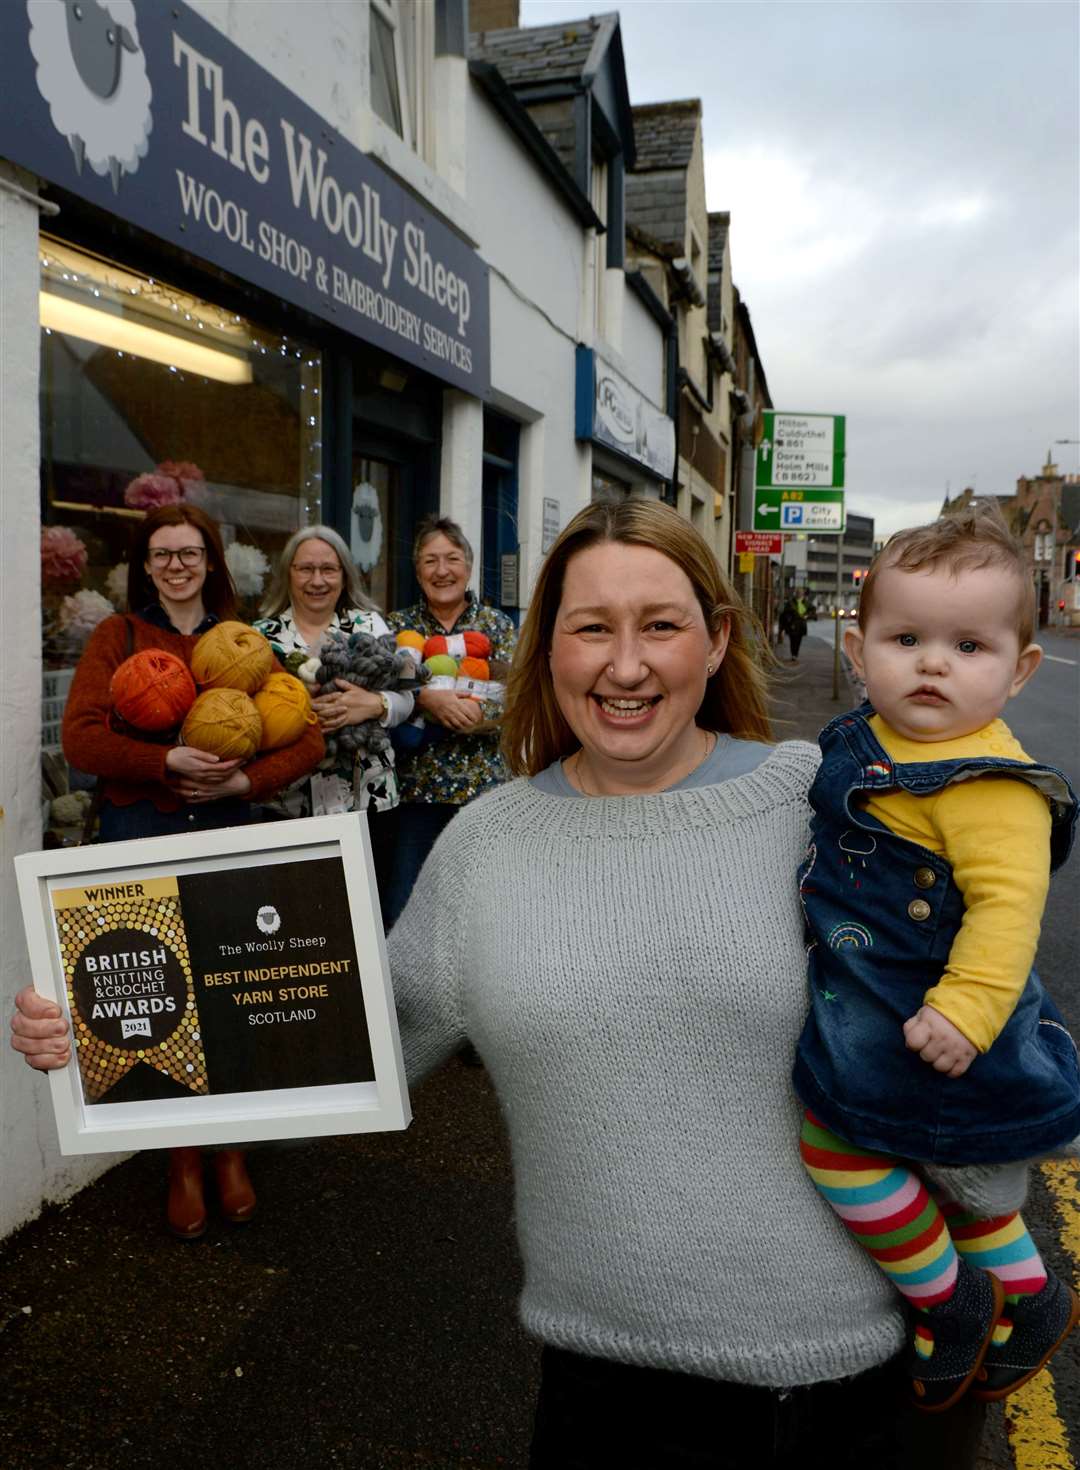 The Woolly Sheep owner Naomi Whyte and daughter Ruby Rae Edwards proudly display the shop's best independent yarn store in Scotland award from the British Knitting & Crochet Awards 2021 watched by customer Mary-Anne Thomson, Pearl (Granny Woolly) Whyte, and customer Andrea Gritter. Picture: James Mackenzie.